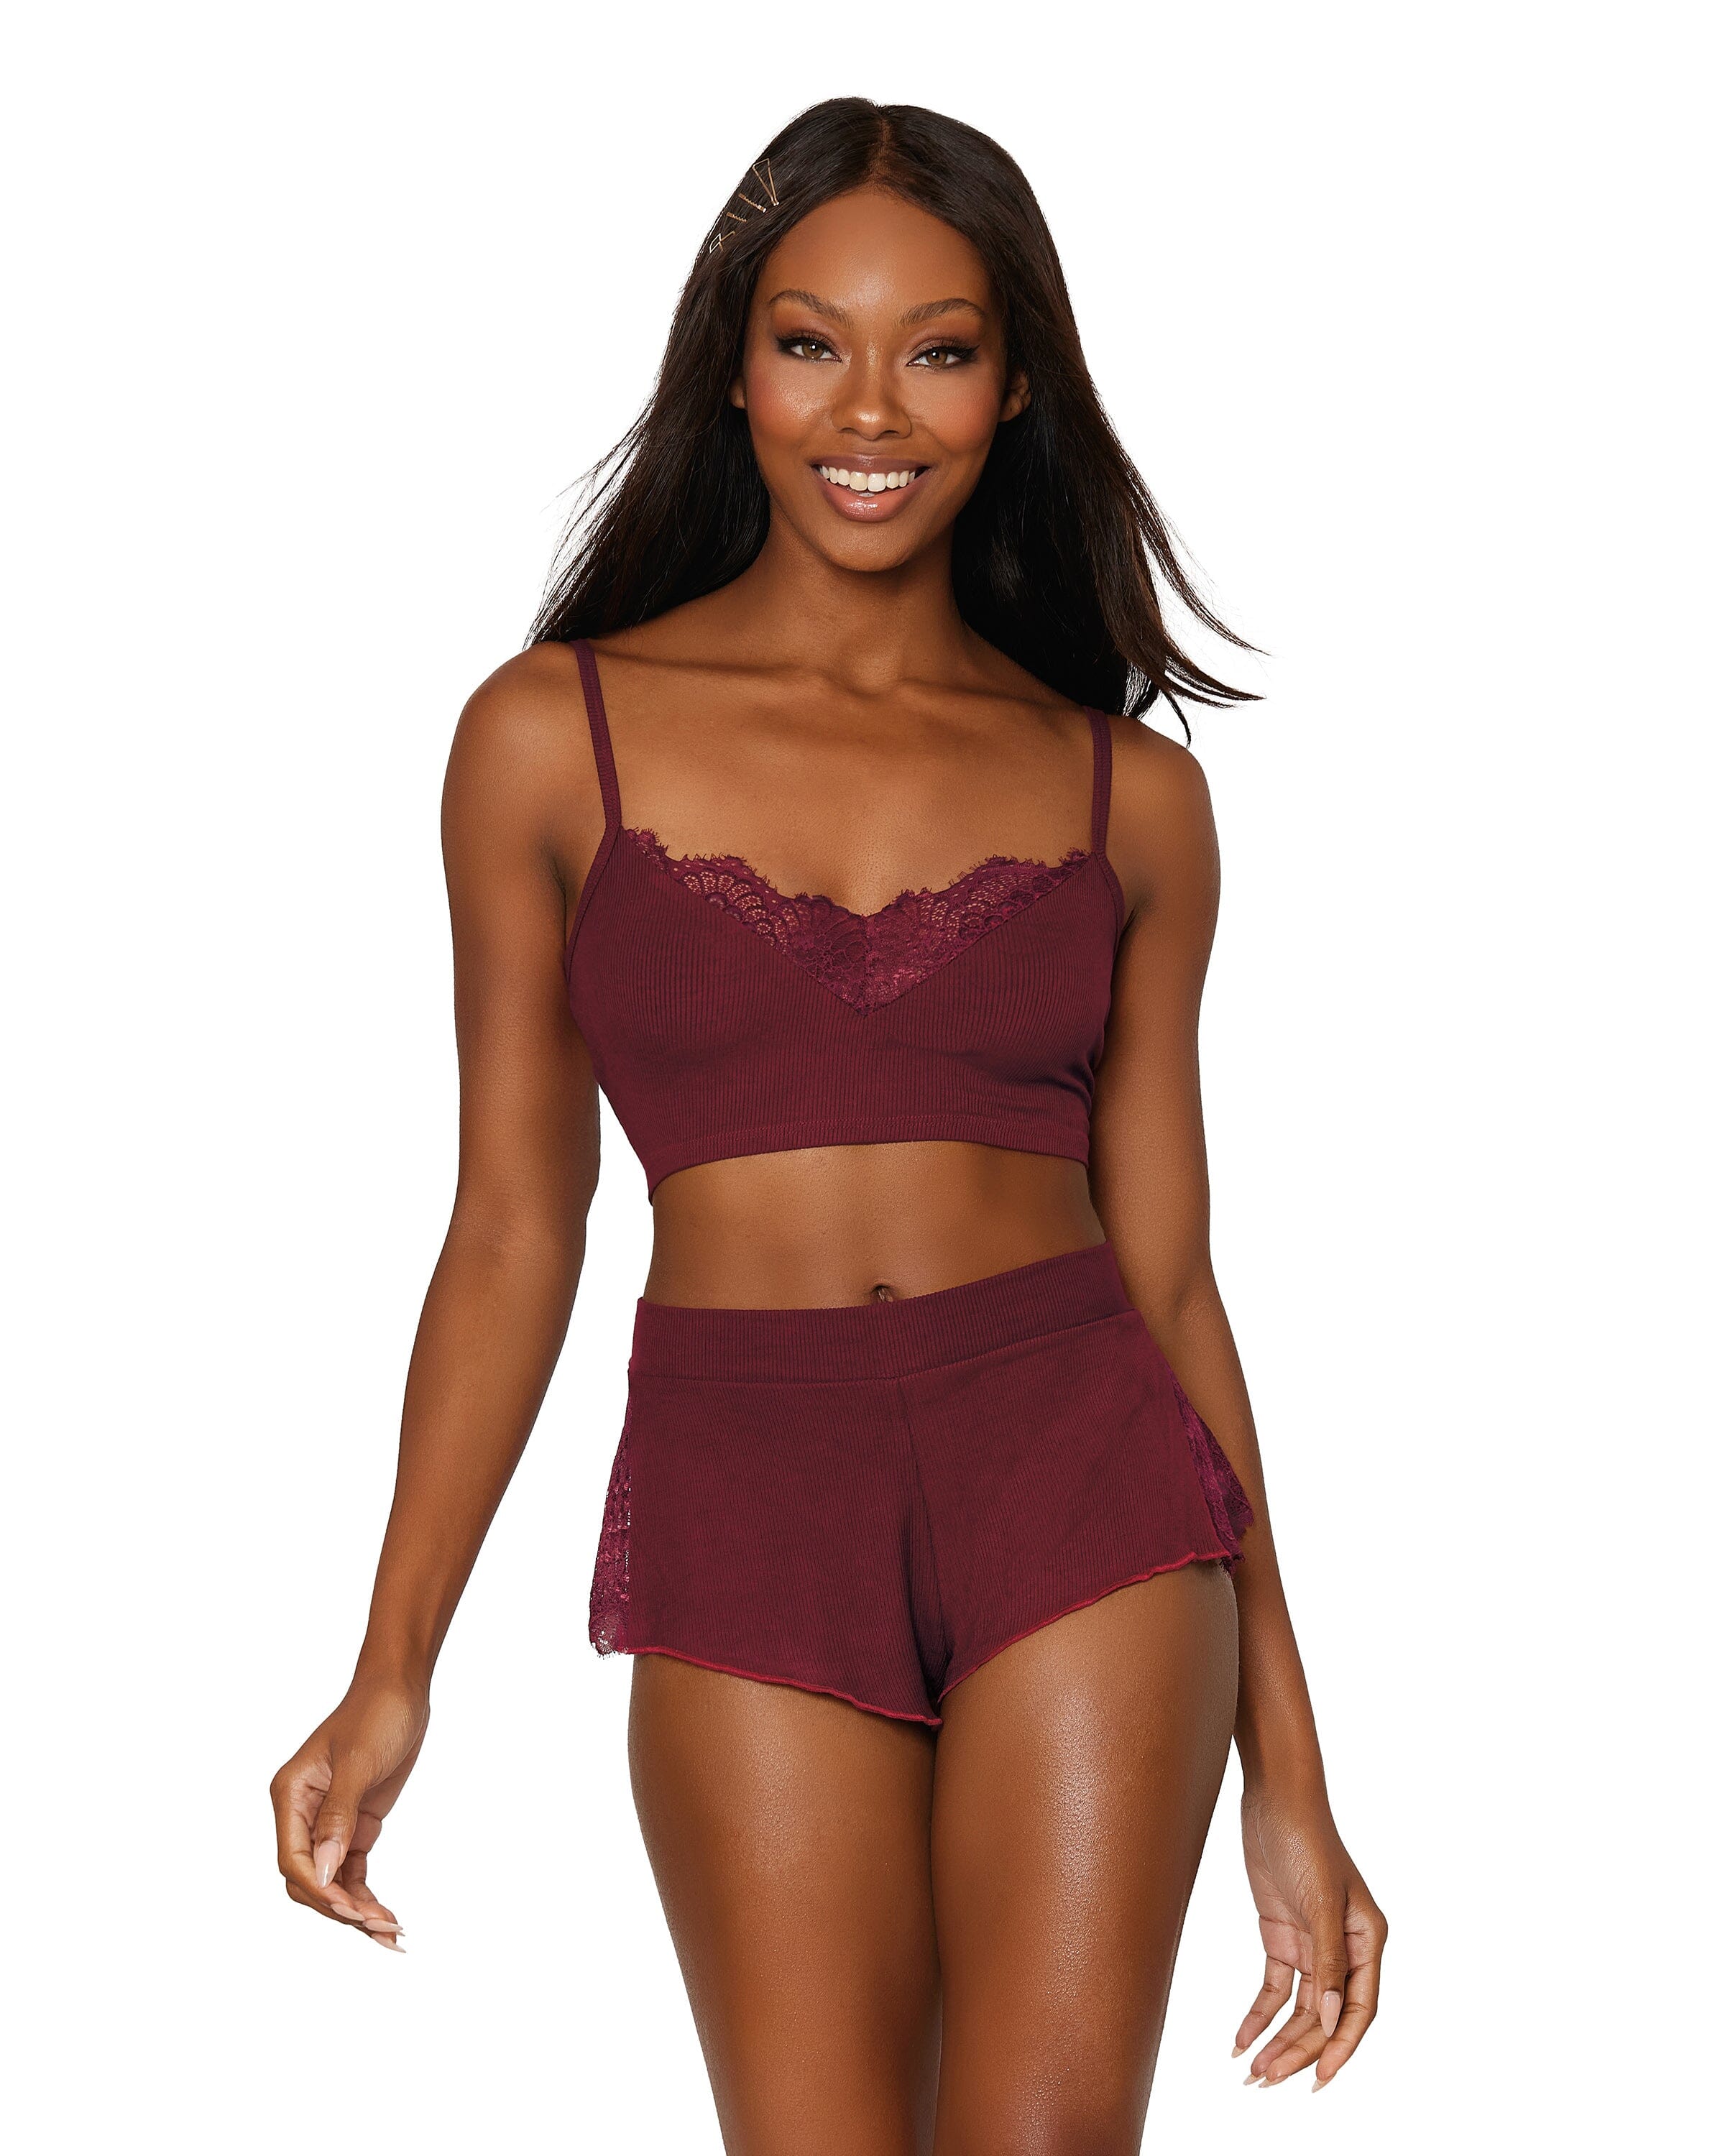 Dreamgirl Rib knit sleepwear bralette and thong set with ruffled lace